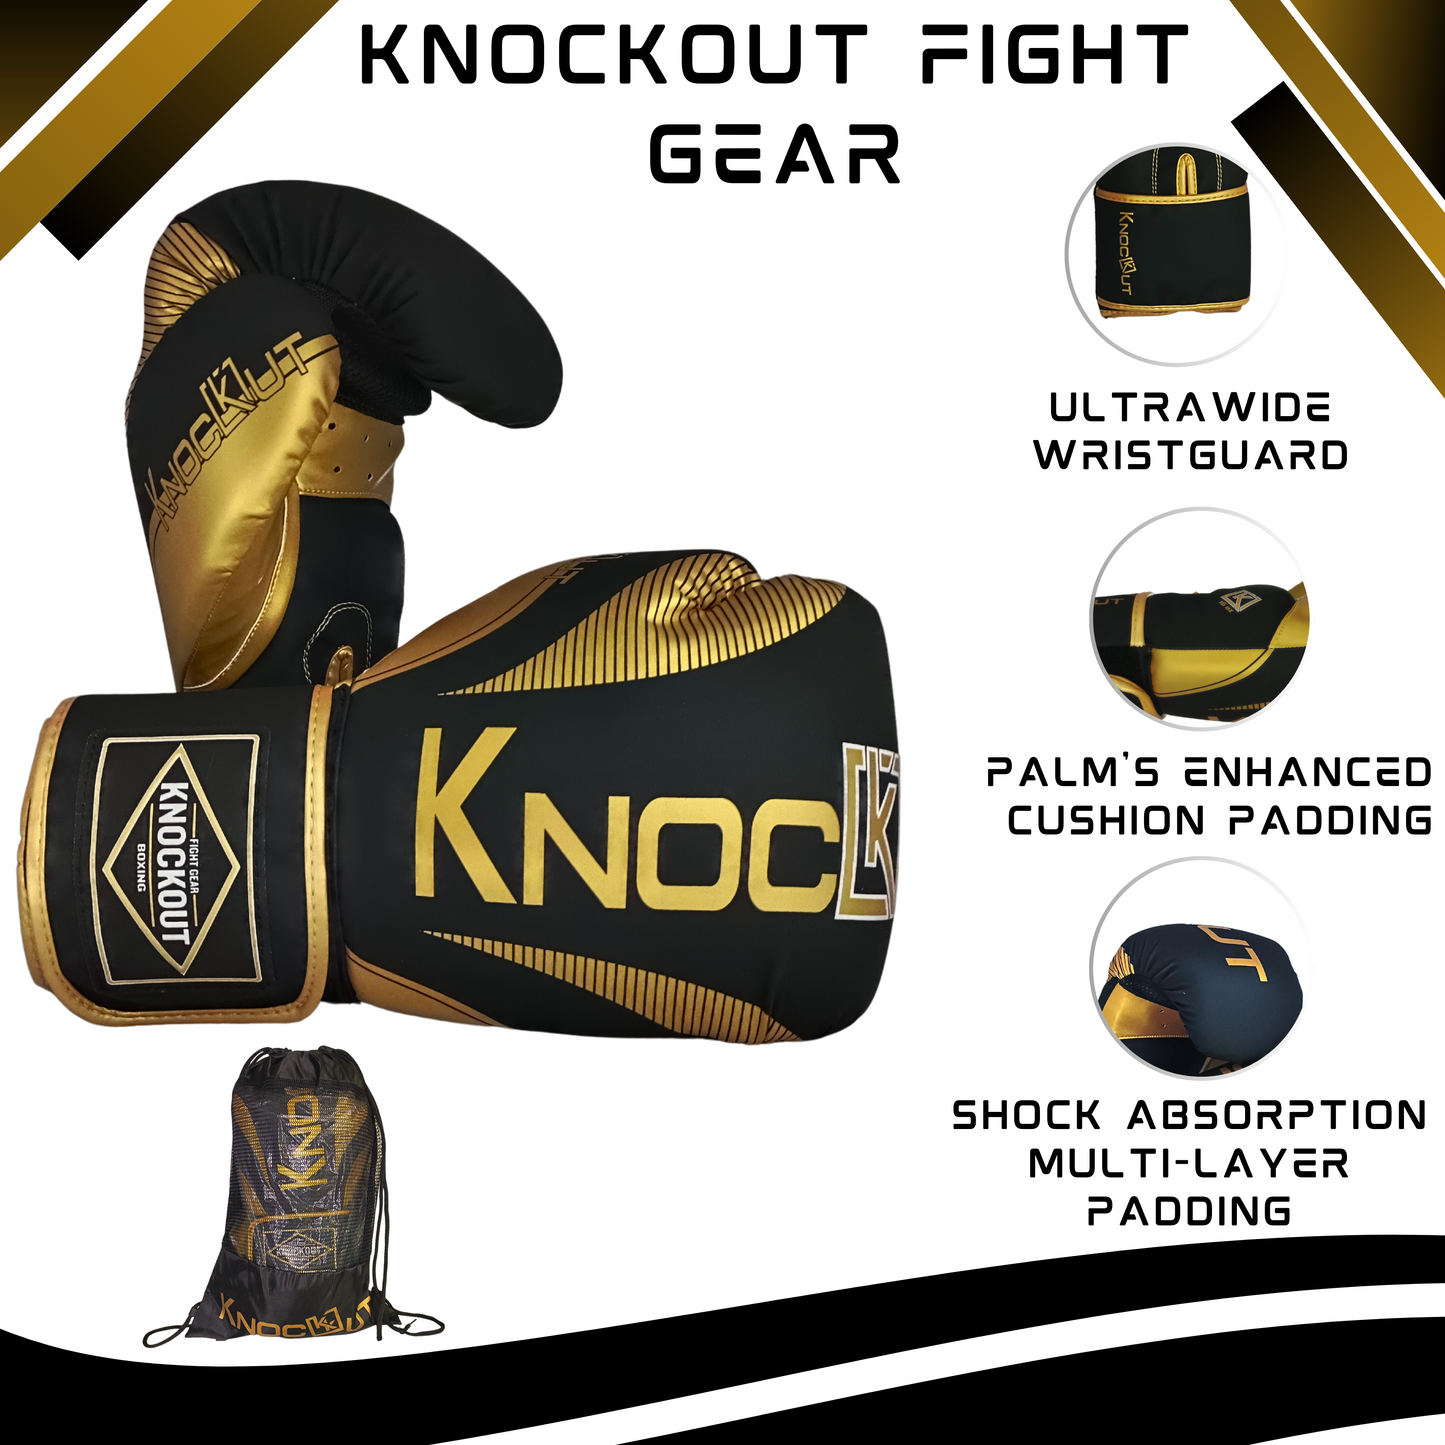 Knockout Elite Boxing Gloves with Hand Wraps and Mouth Guard for Men, Women Muay Thai, Kickboxing, Youth Heavy Bag Workouts, and Home Gym Training